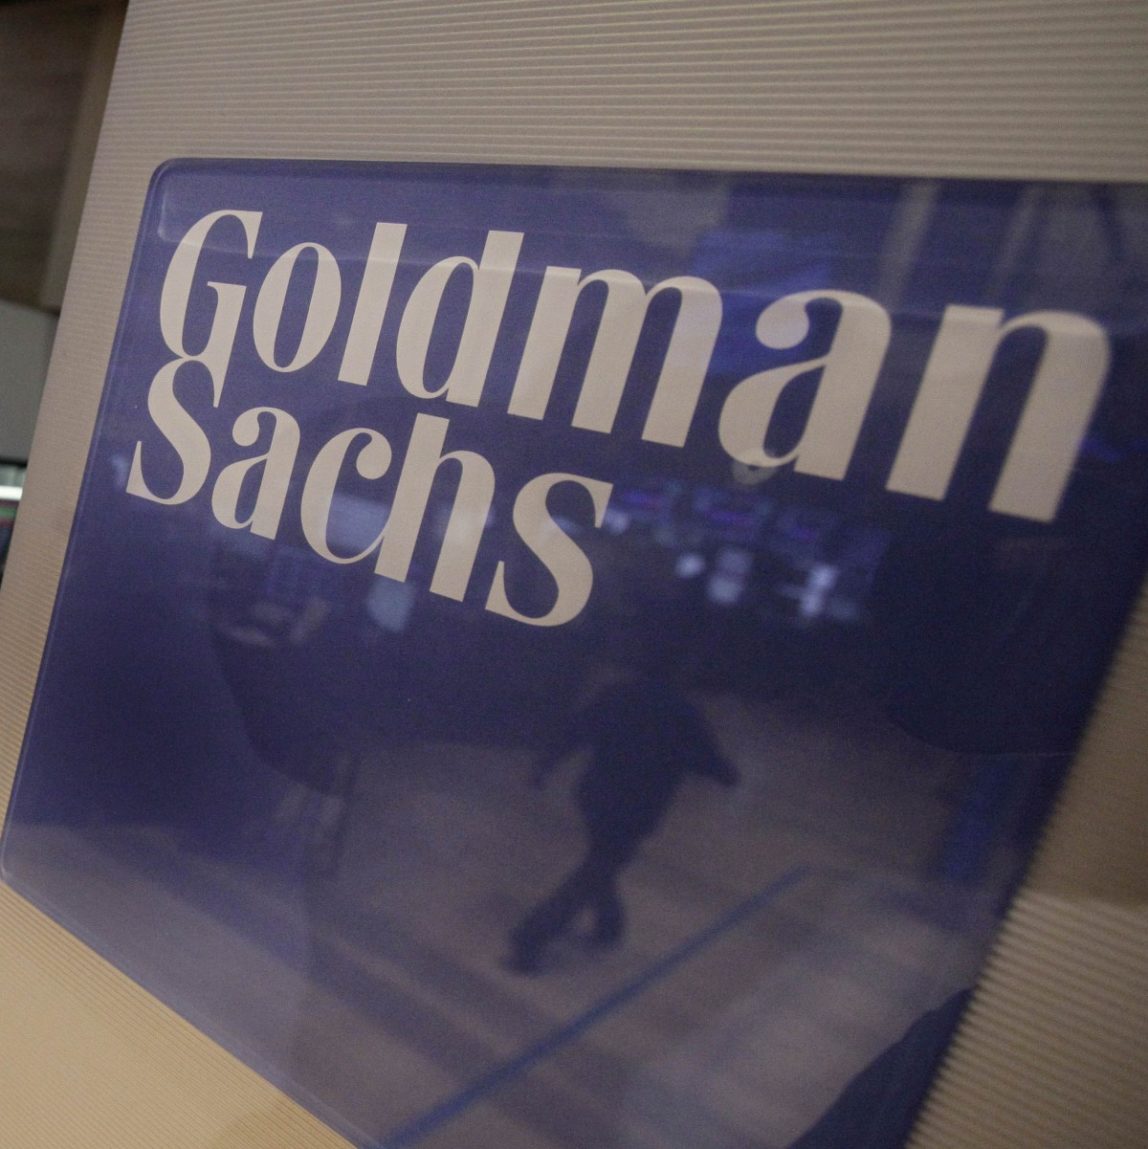 Traders work in the Goldman Sachs booth on the floor of the New York Stock Exchange Thursday, March 15, 2012. (AP Photo/Richard Drew)